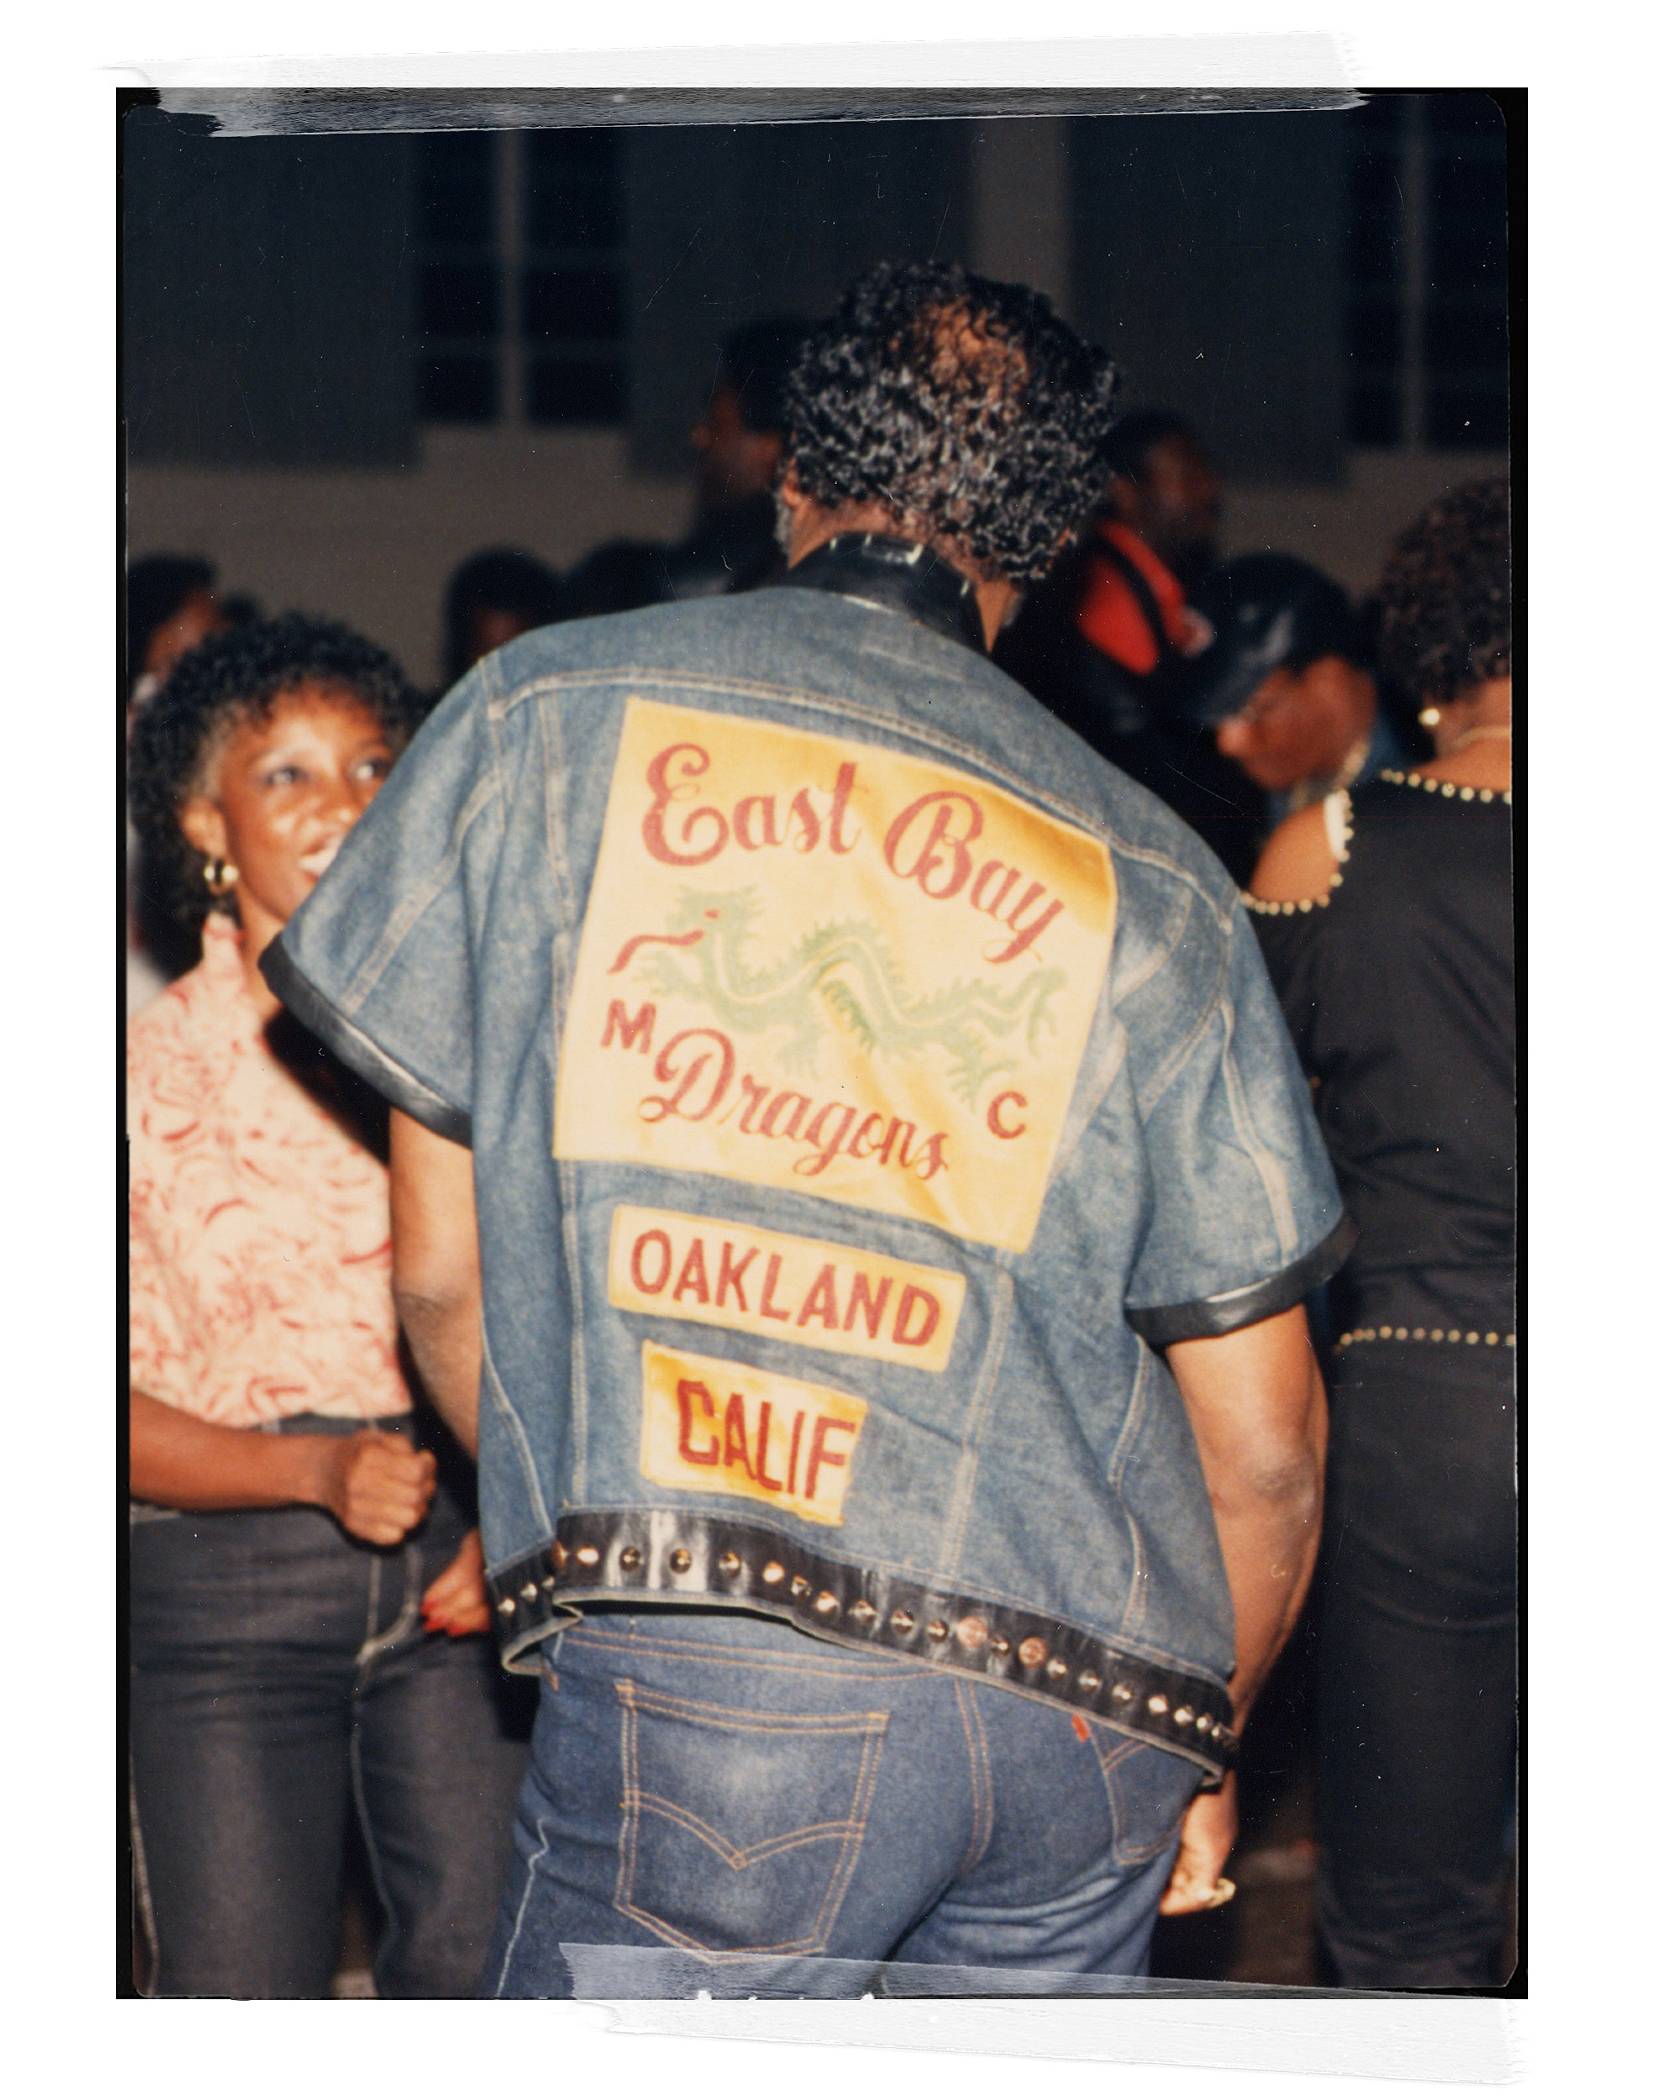 Man wearing an East Bay Dragons customized Levi's denim top with Levi's jeans on.